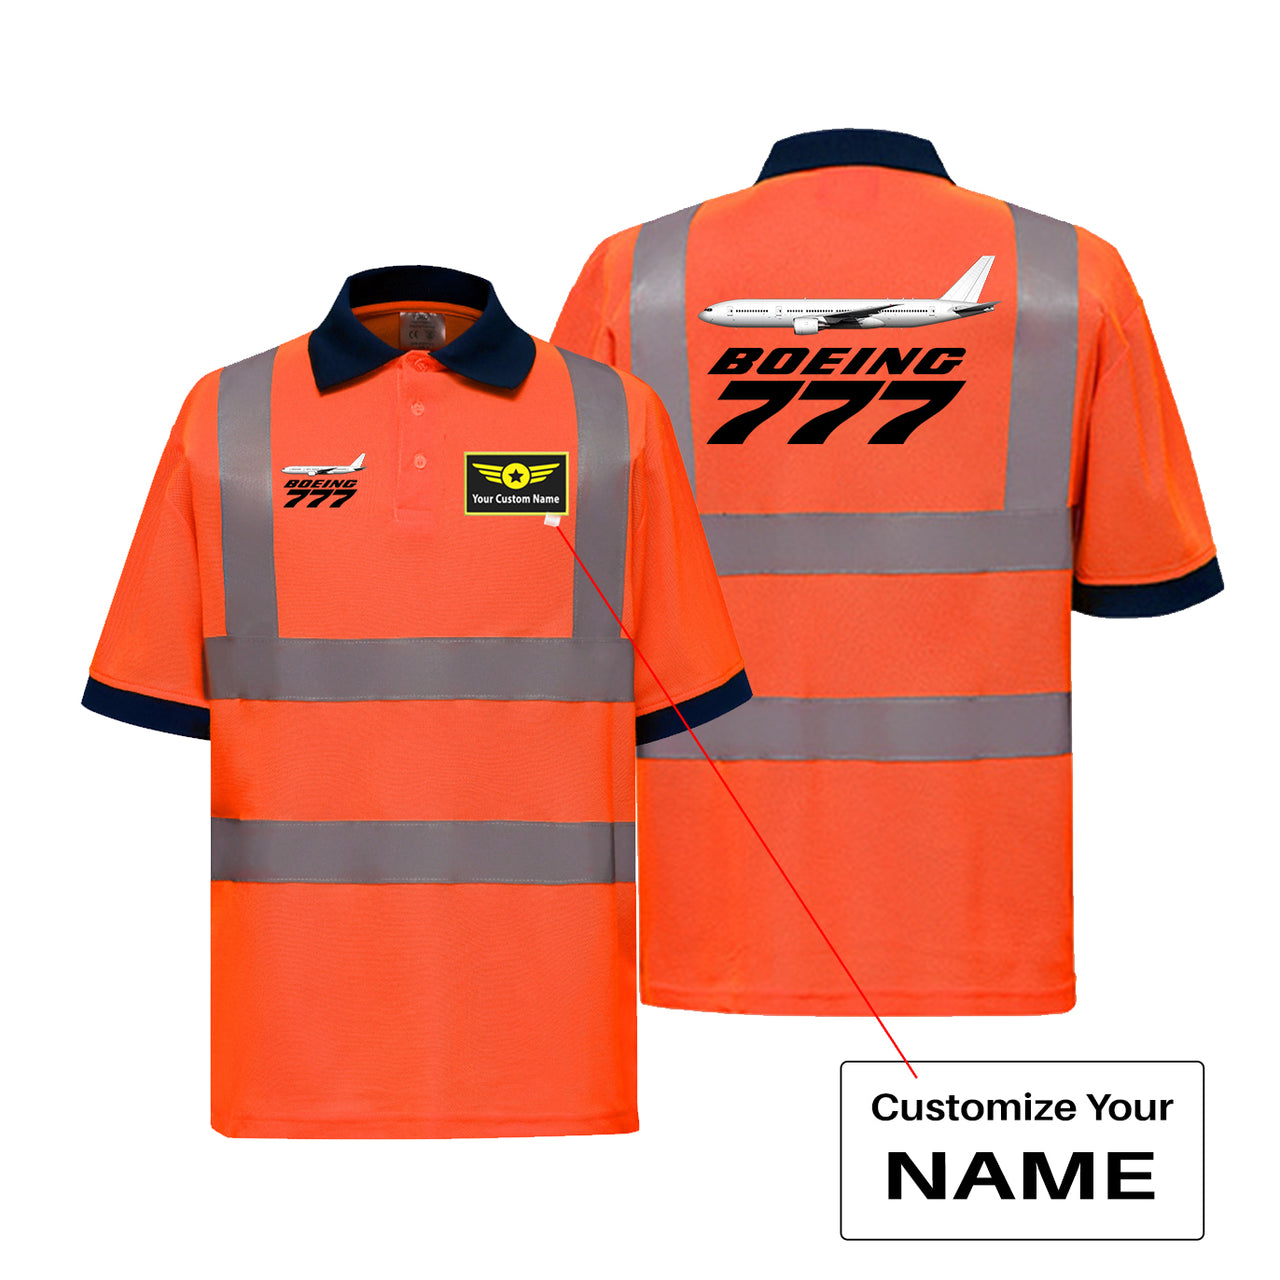 The Boeing 777 Designed Reflective Polo T-Shirts